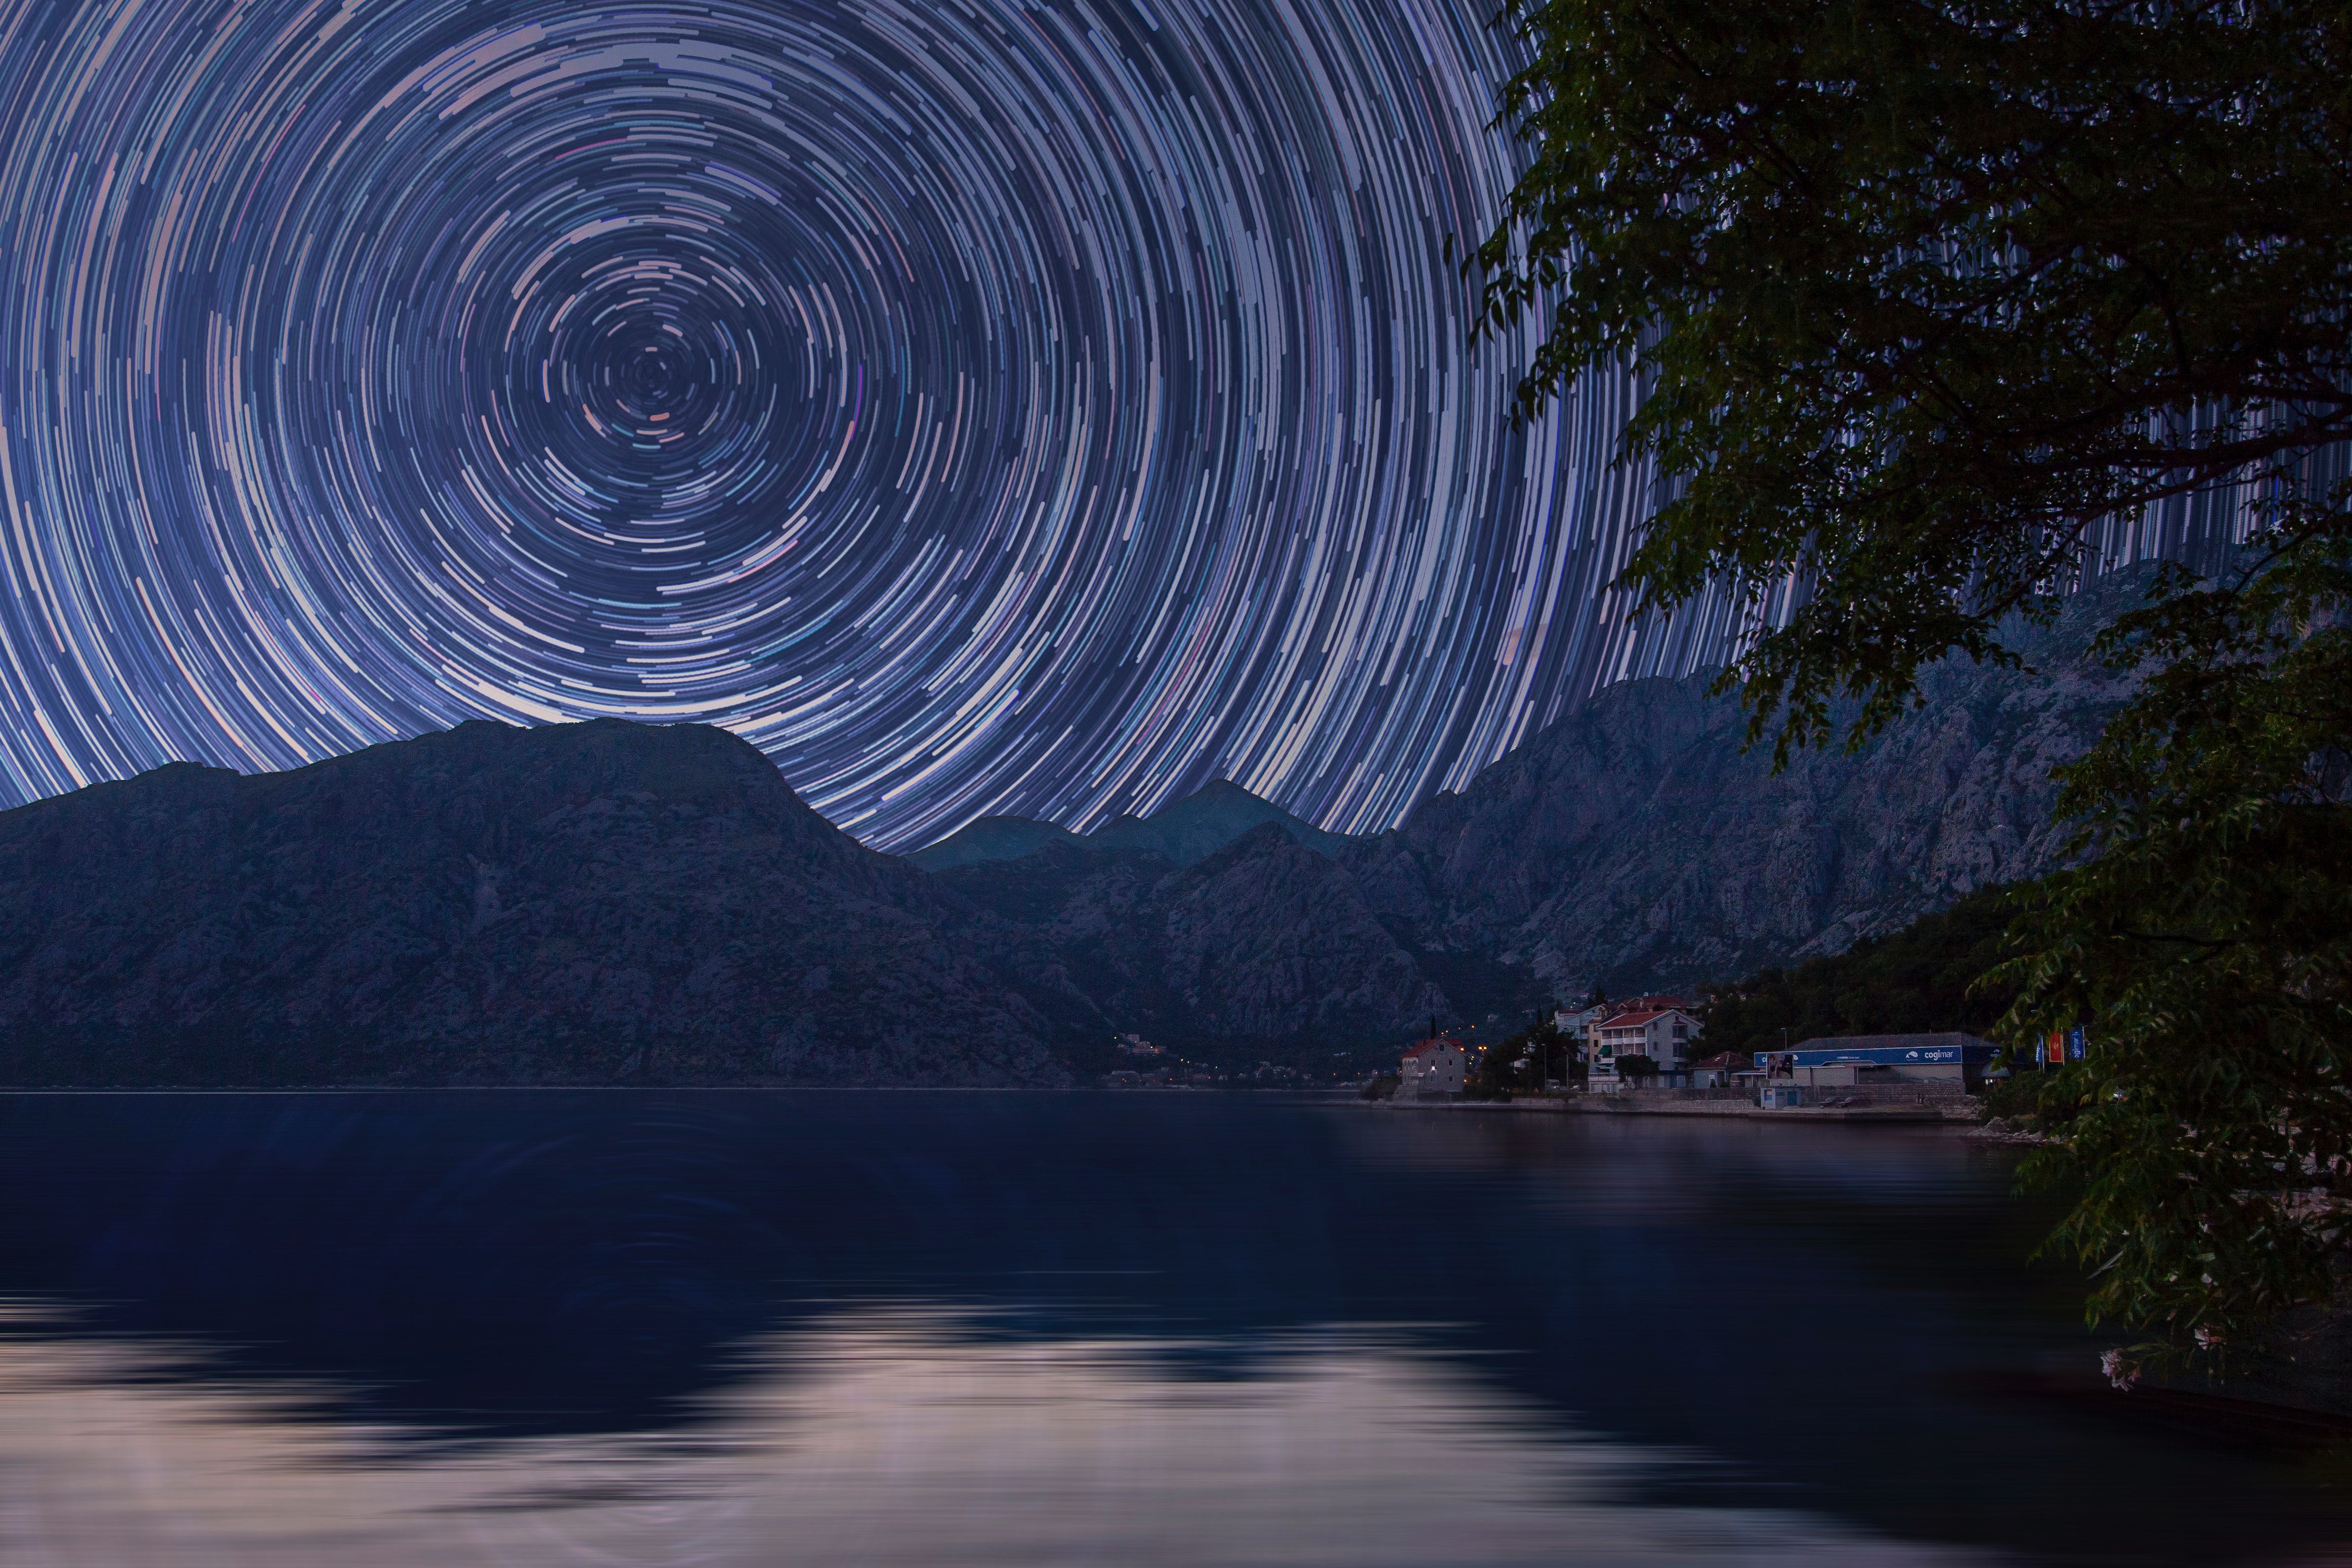 An example of a star trail photo.